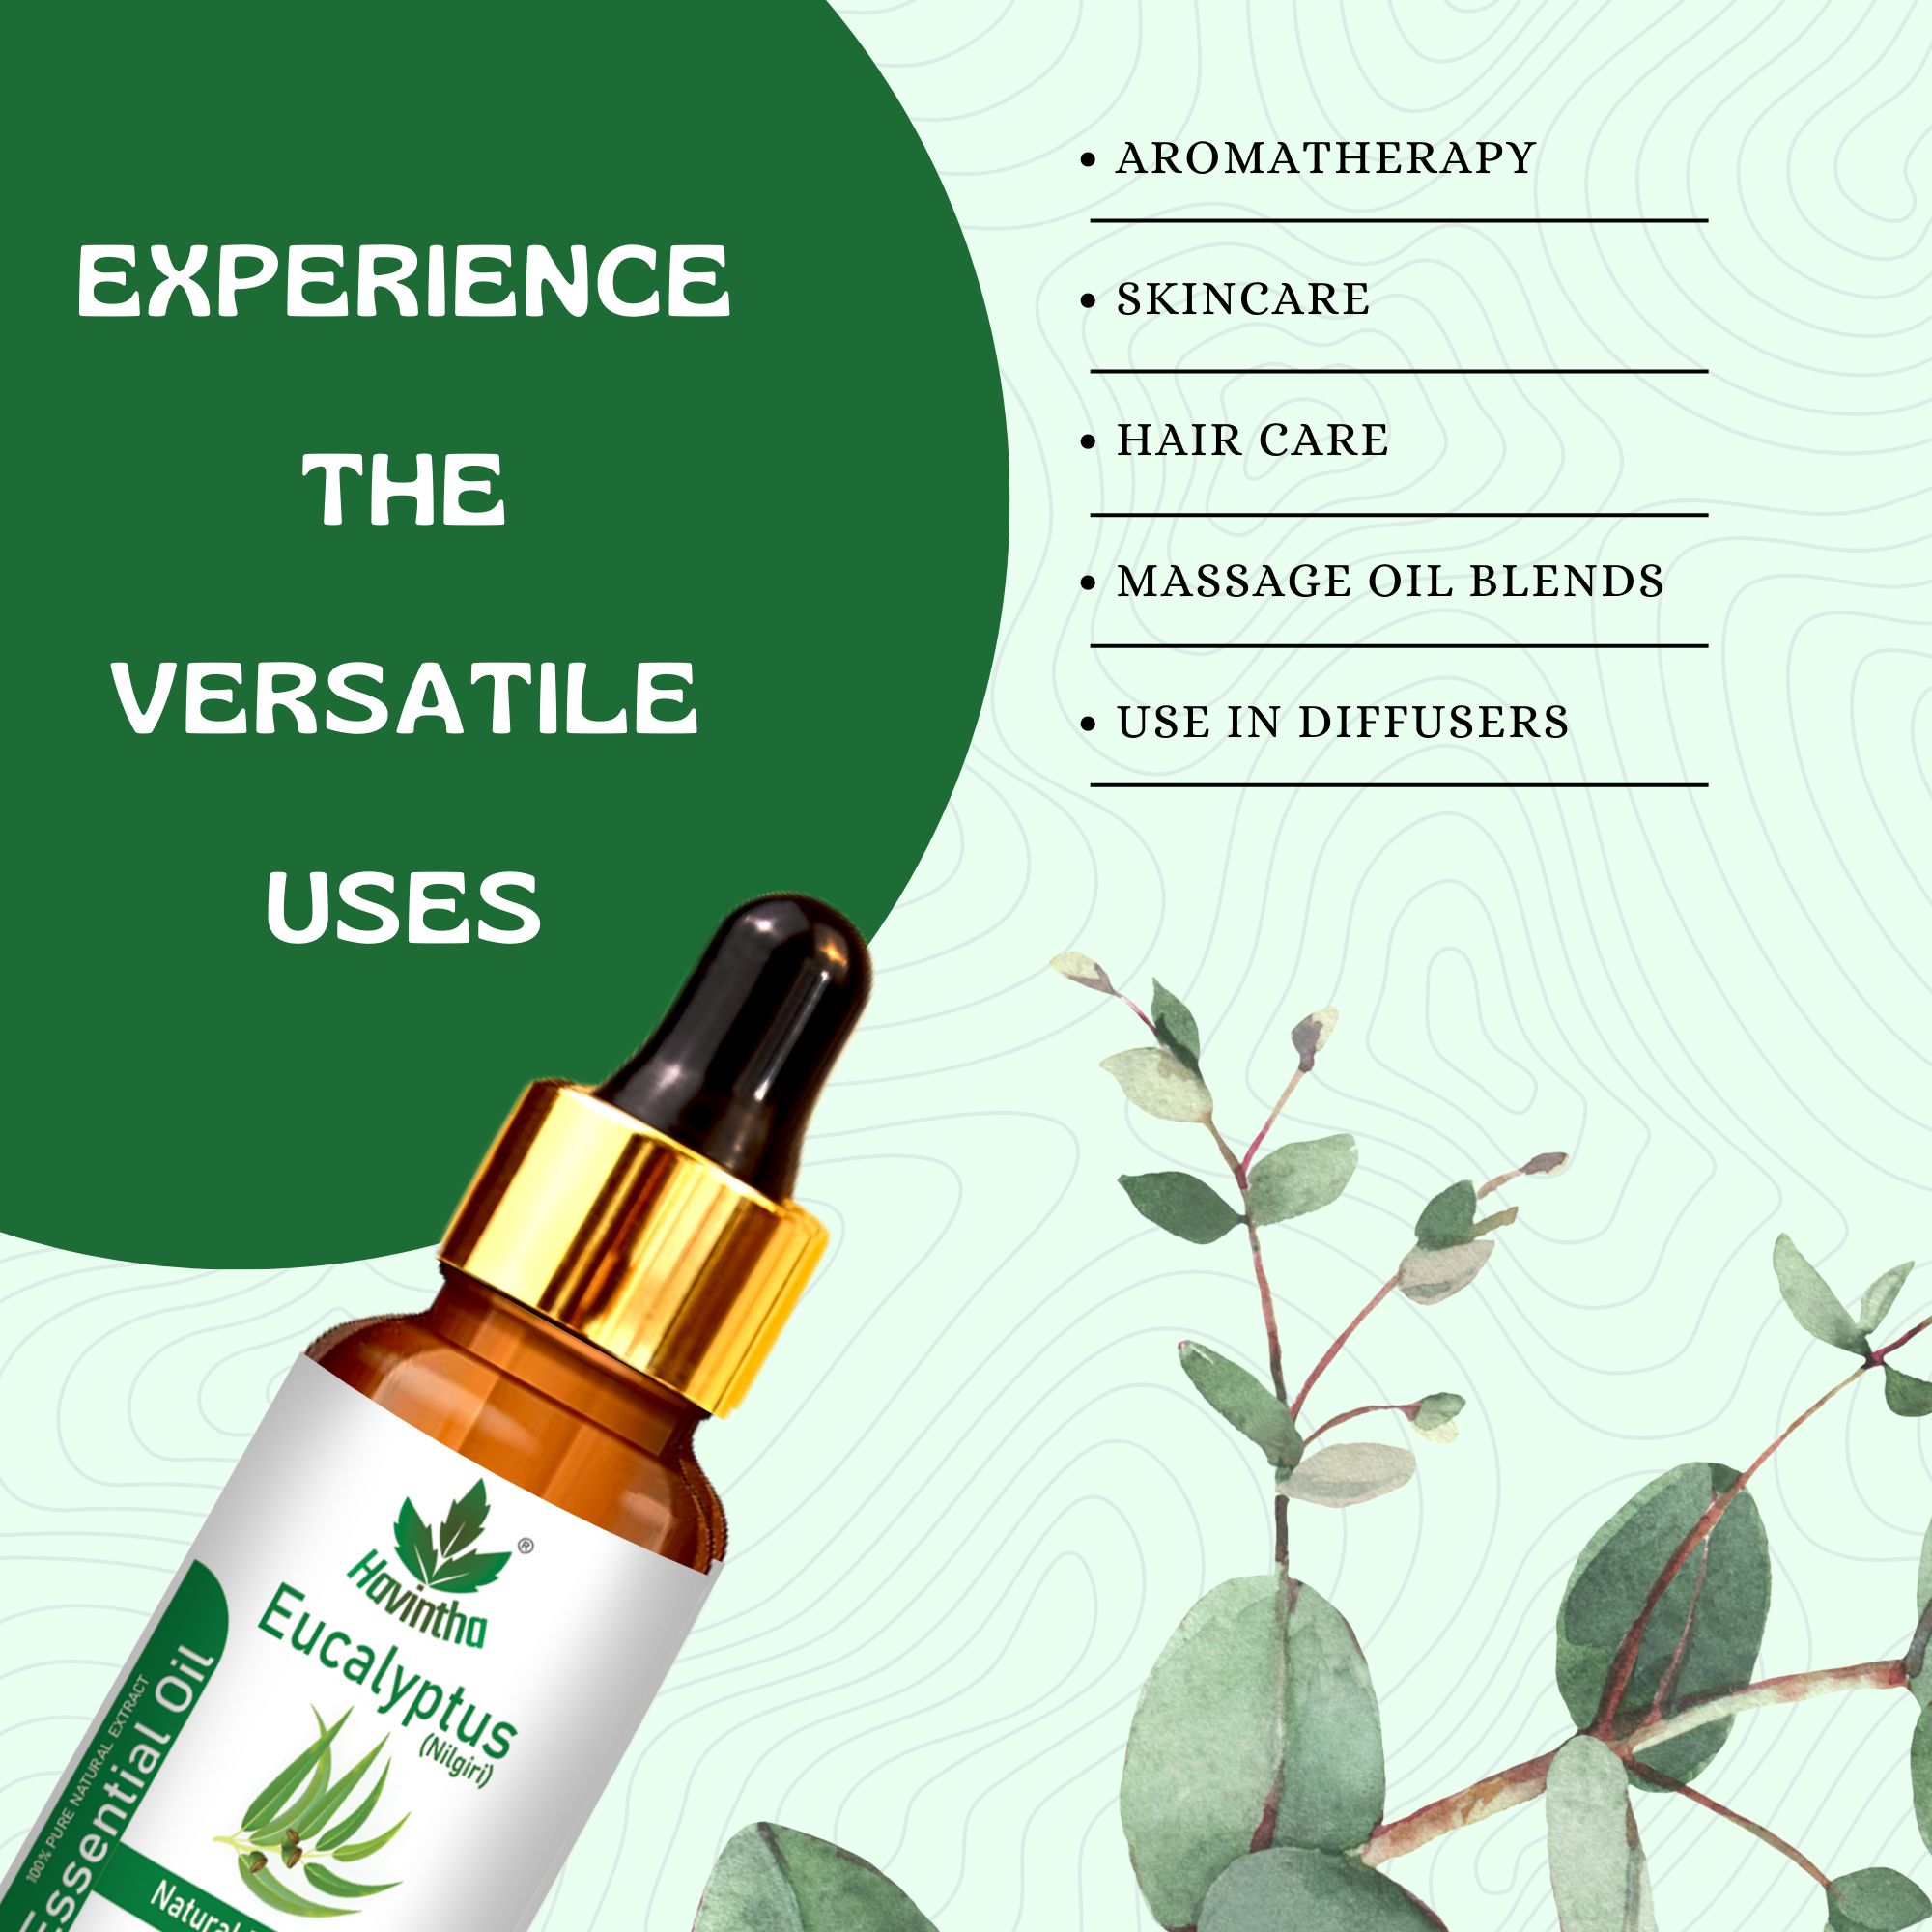 Havintha Pure and Organic Eucalyptus Essential Oil for Skin, Hair and Aromatherapy - 15 ml.